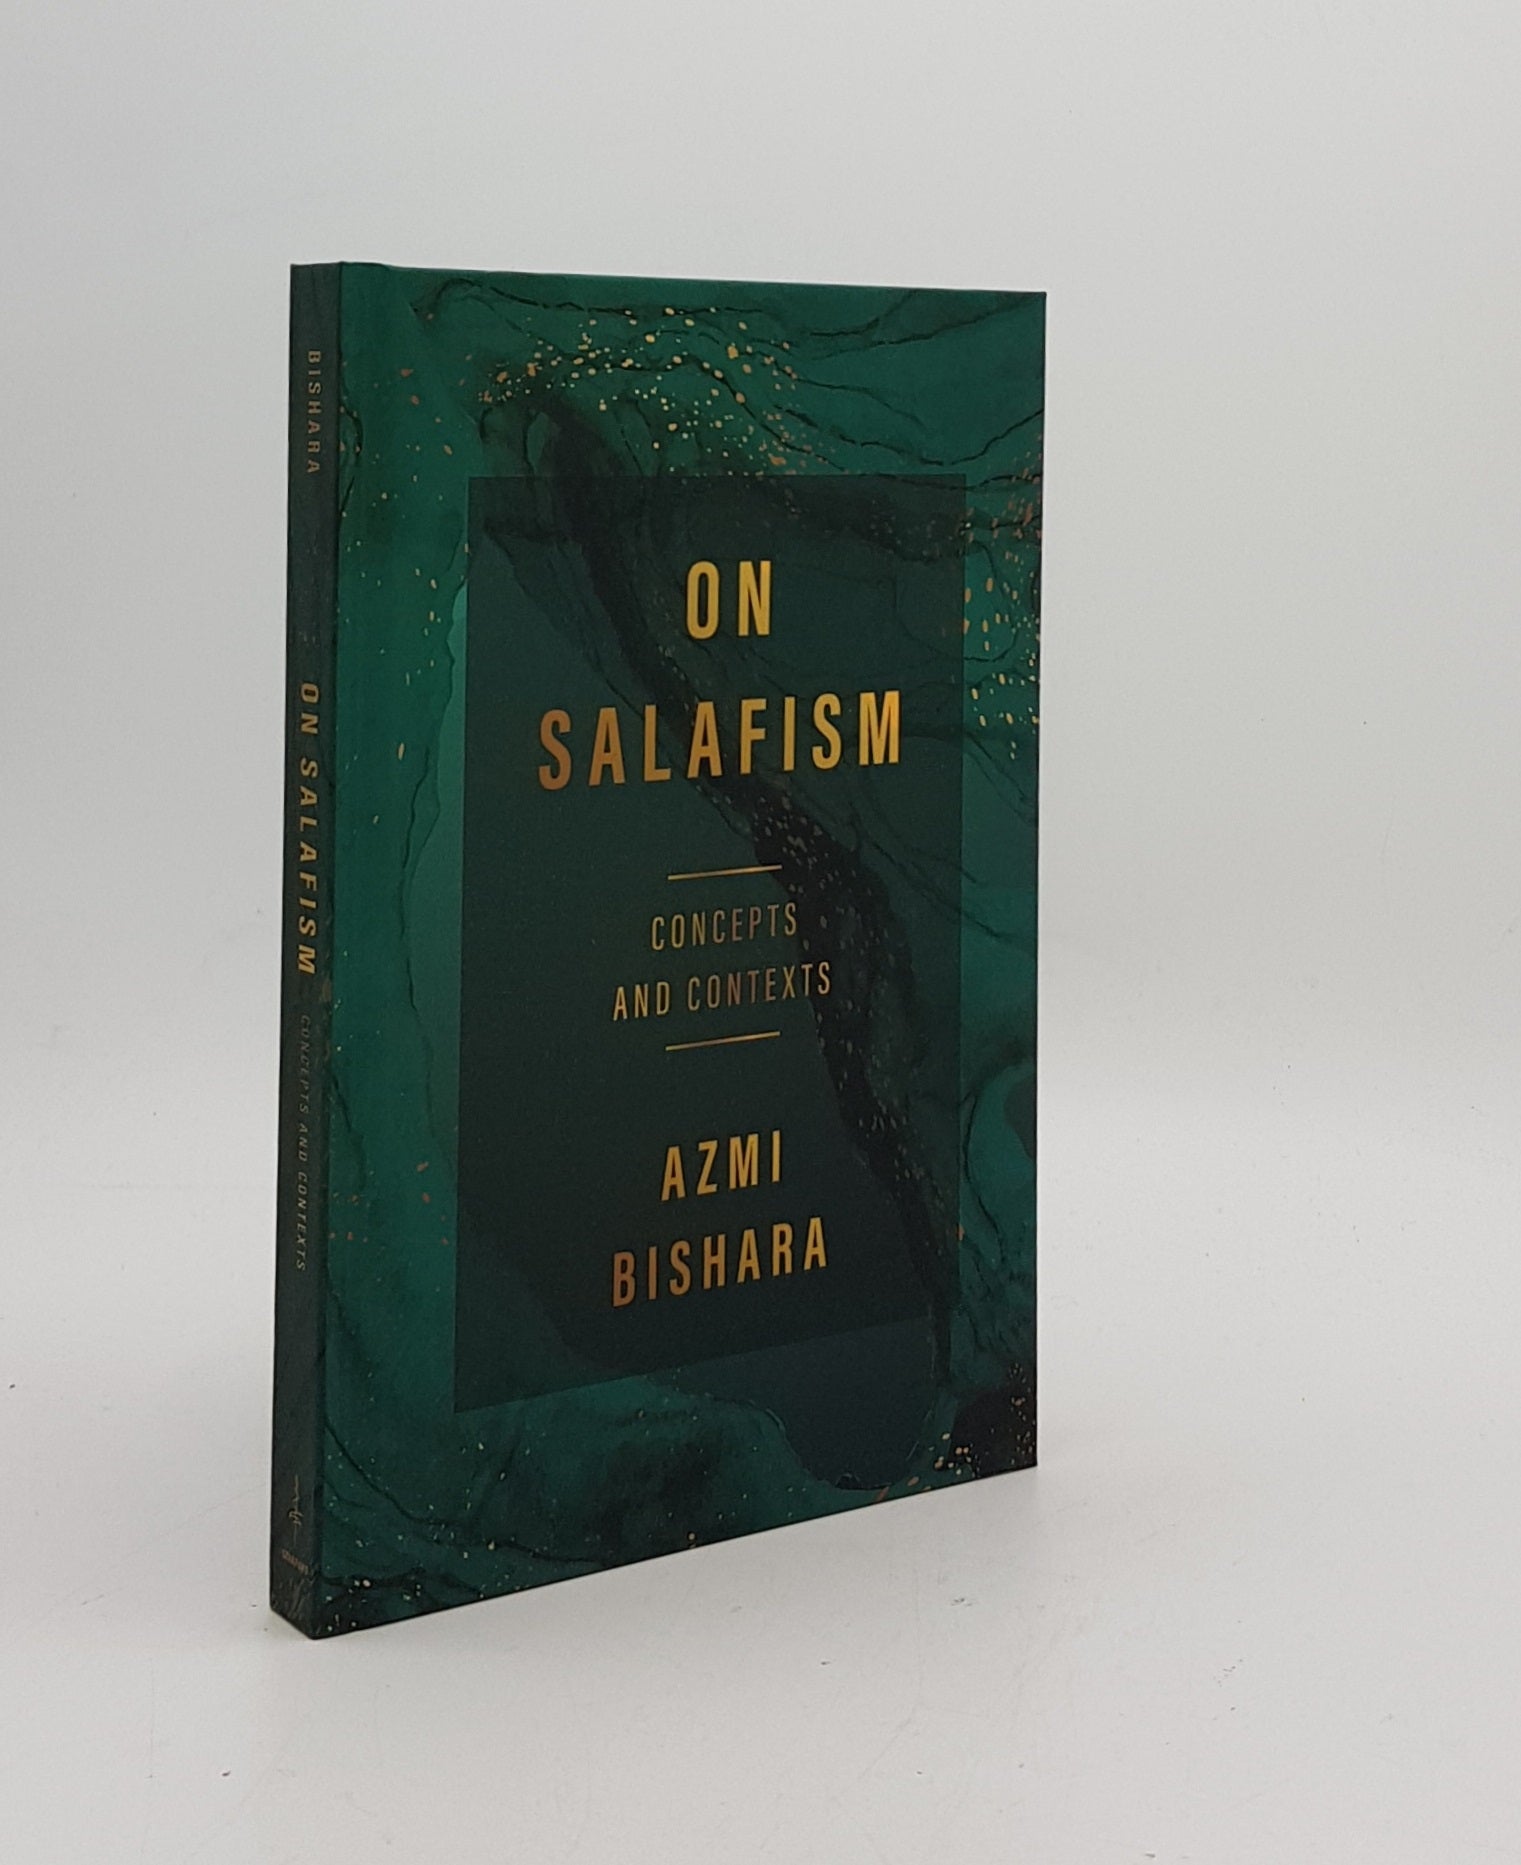 BISHARA Azmi - On Salafism Concepts and Contexts (Stanford Studies in Middle Eastern and Islamic Societies and Cultures)